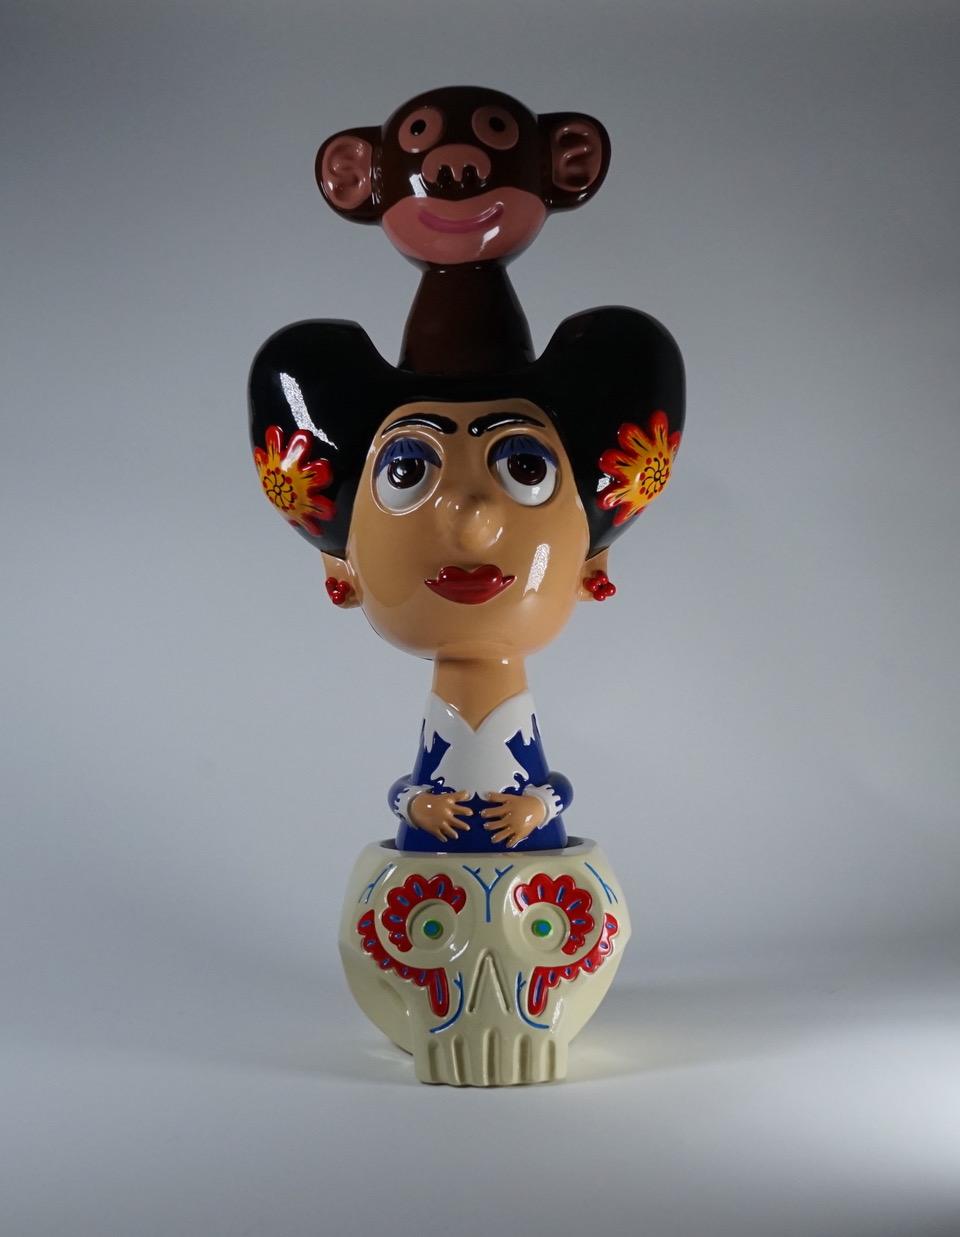 Frida model glazed ceramic sculpture from the new collection École d'Art s by Massimo Giacon for Superego Editions. The sculpture is made up of three separable elements Limited edition of 50 pieces. Signed and numbered.

Biography
Massimo Giacon was